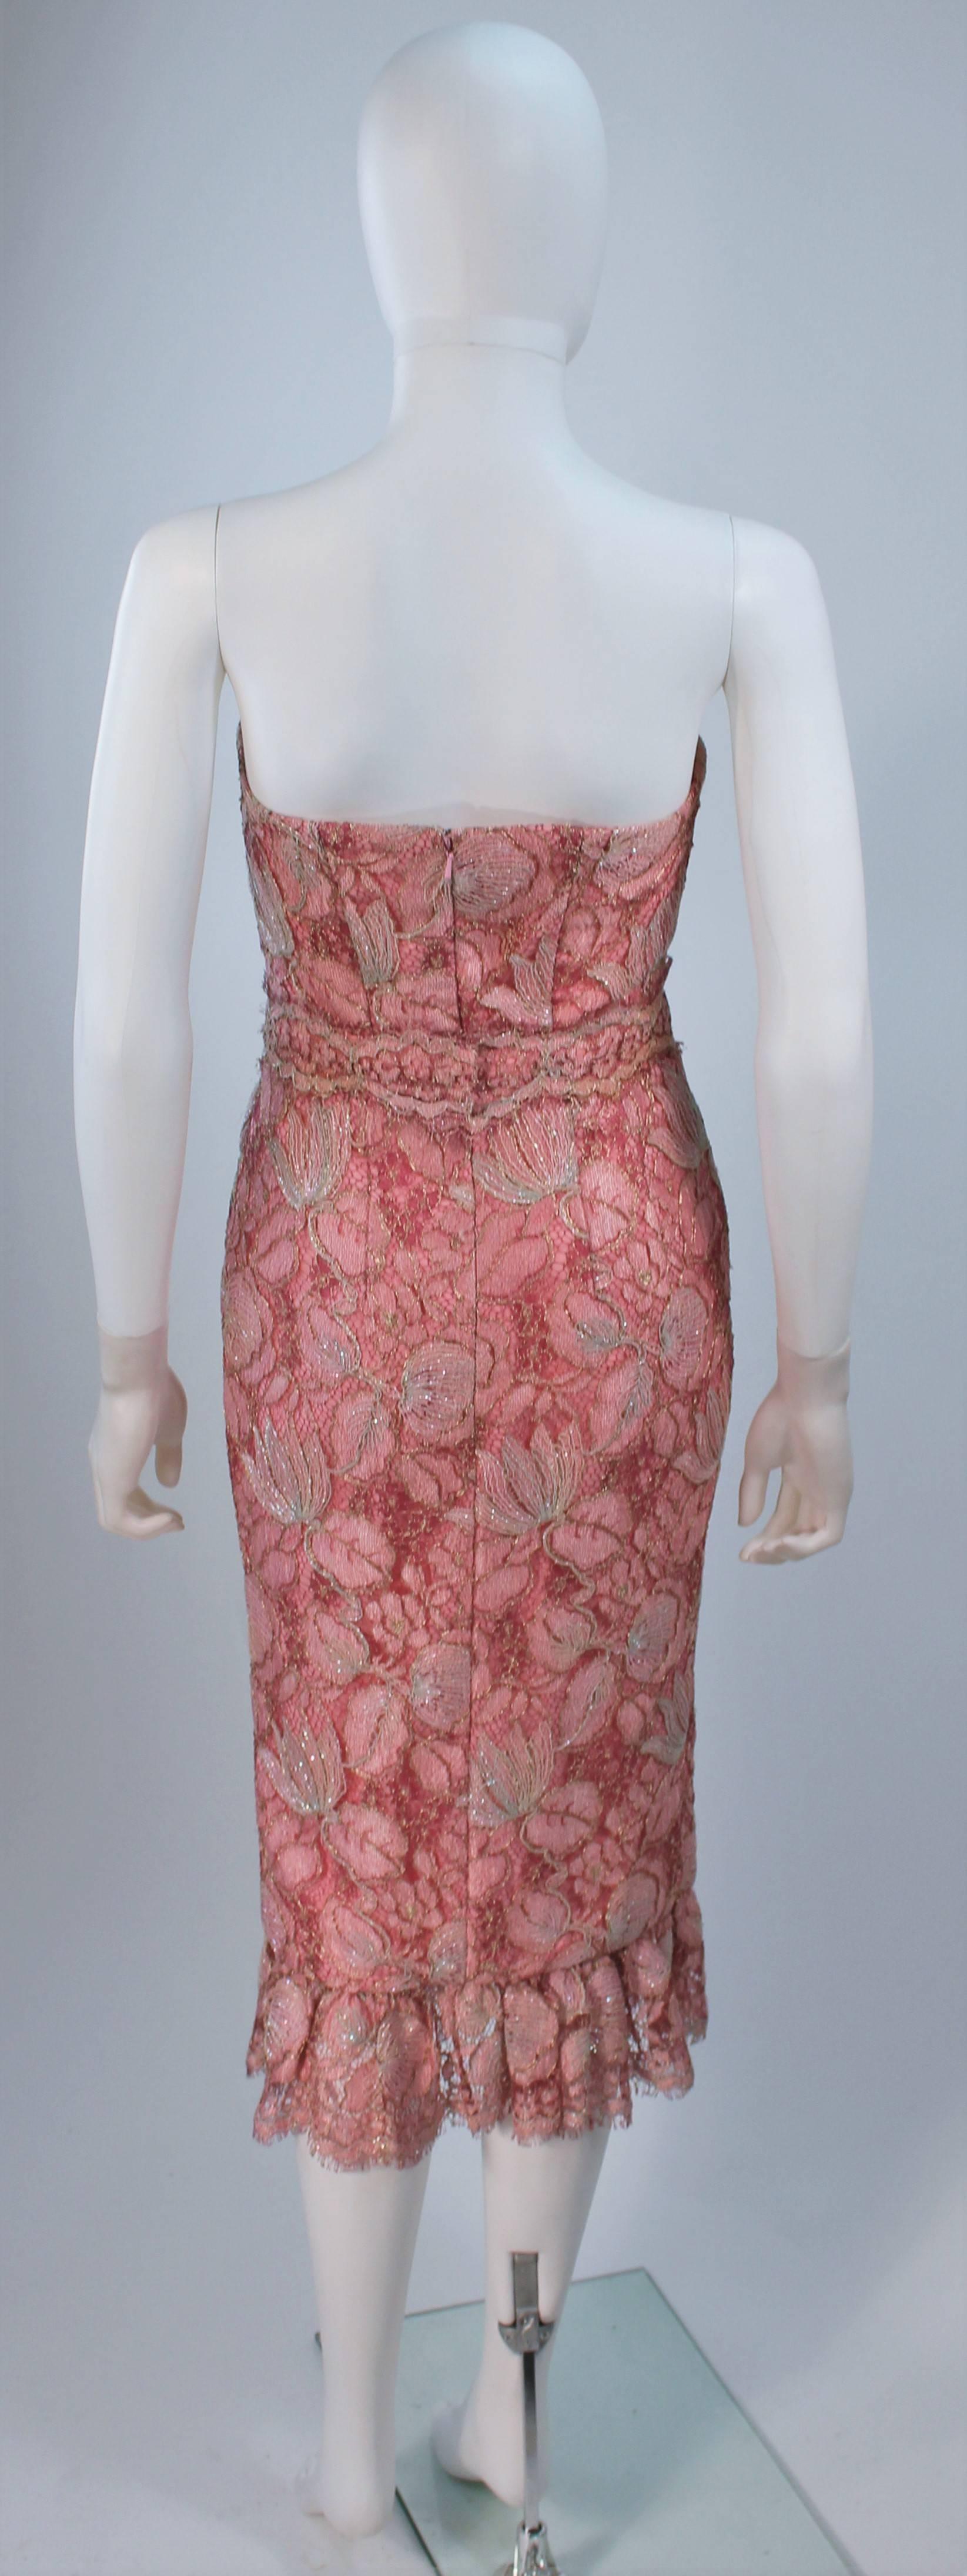 ELIZABETH MASON COUTURE Pink Metallic Lace Cocktail Dress Made to Order For Sale 4